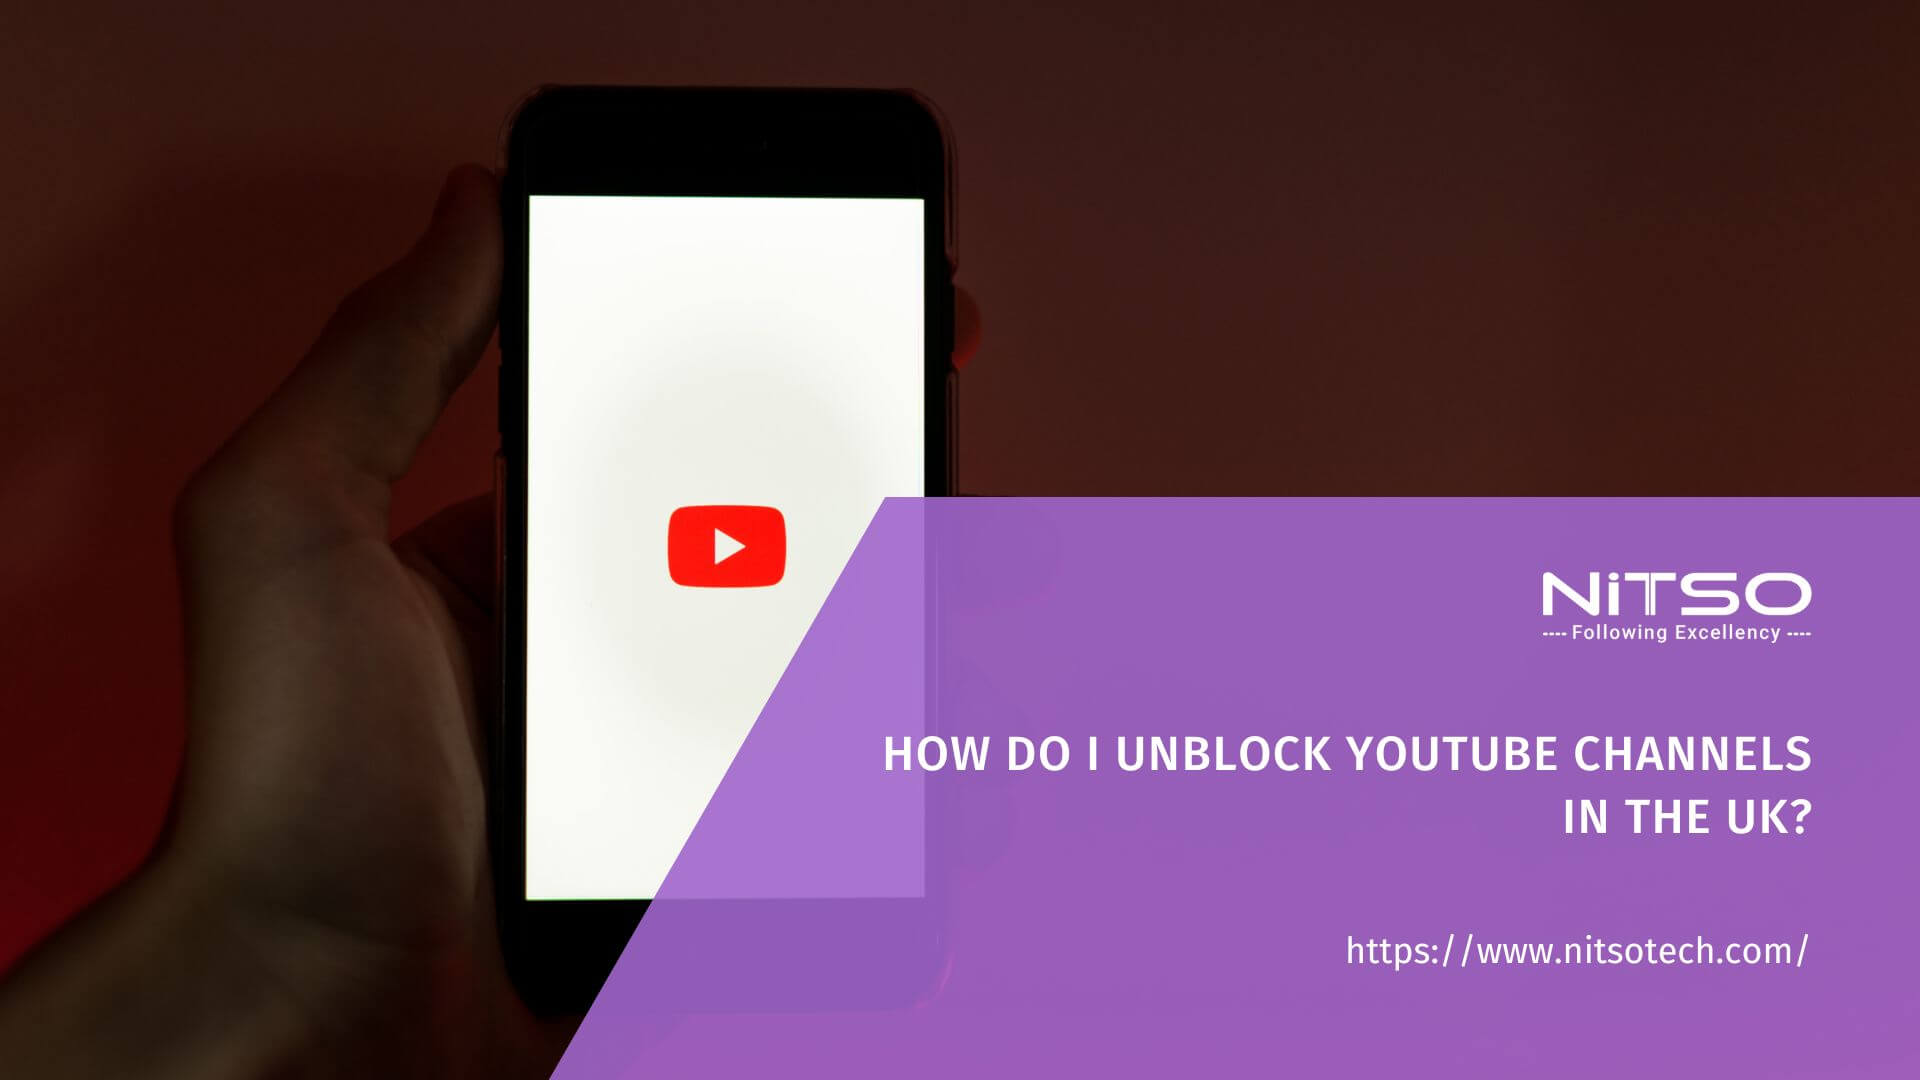 How do I unblock YouTube channels in the UK?